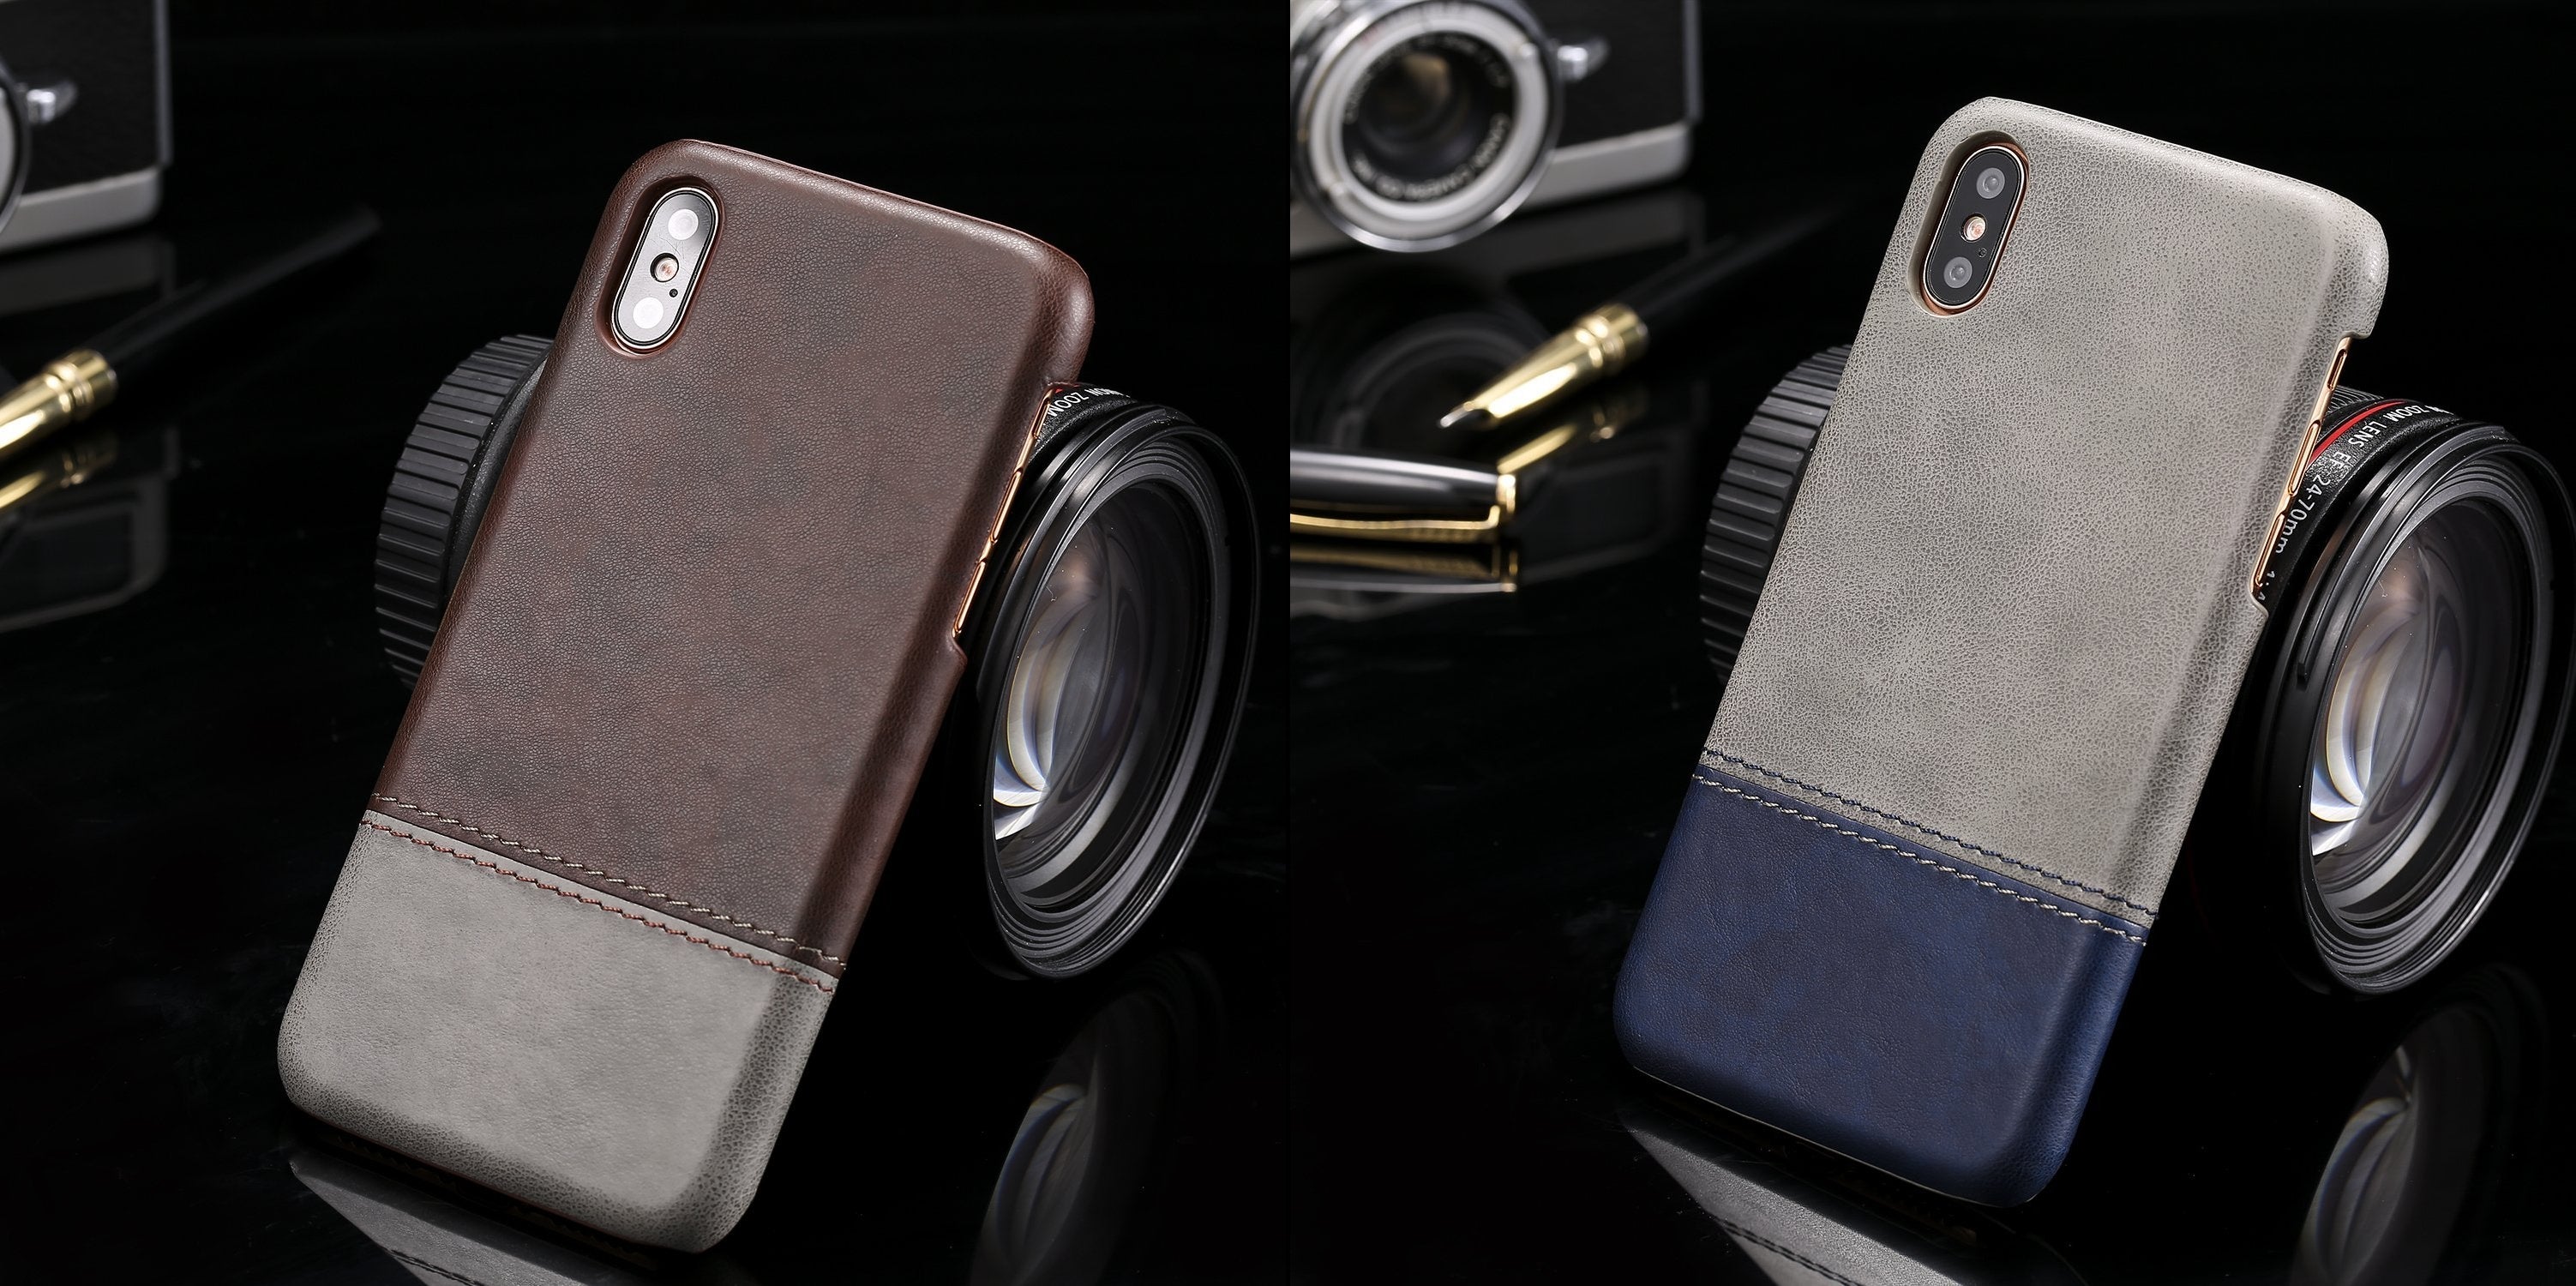 Dress it in style: here are 14 elegant and stylish cases for the iPhone X